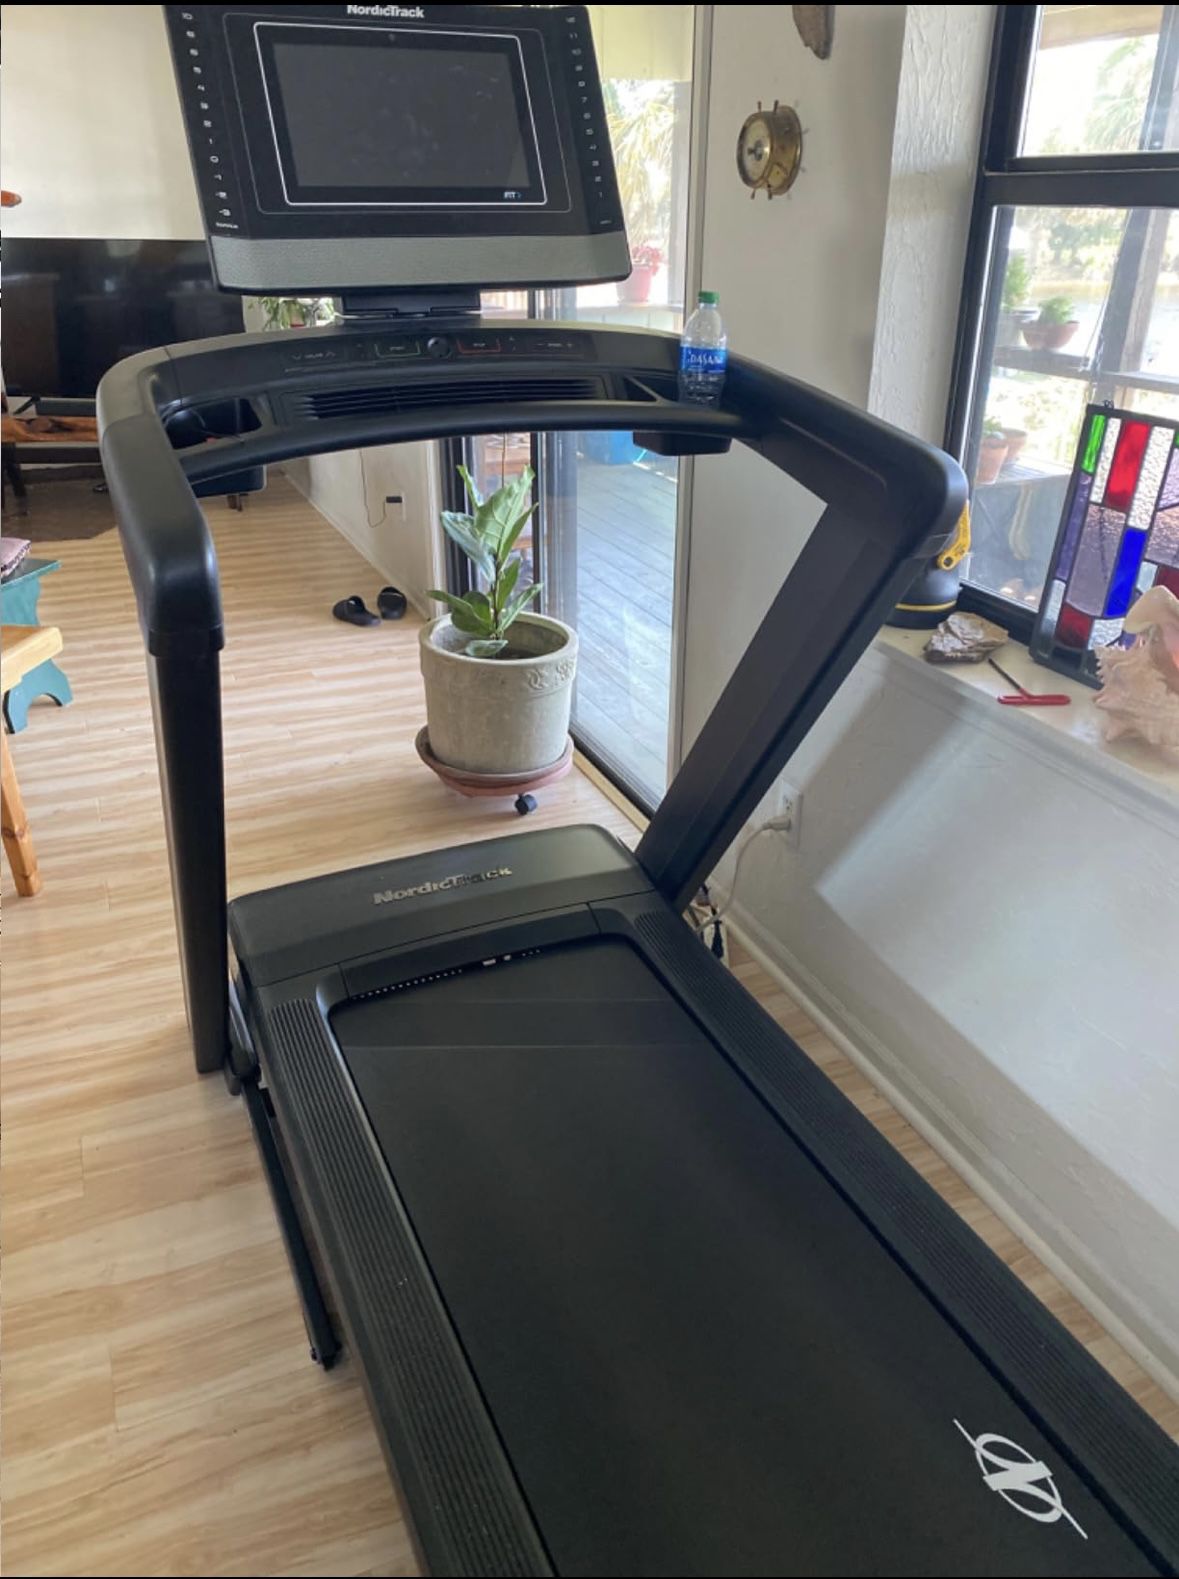 NordicTrack Commercial Series 1250, 1750, 2450: Expertly Engineered Foldable Treadmill, Treadmills For Home Use, Walking Treadmill